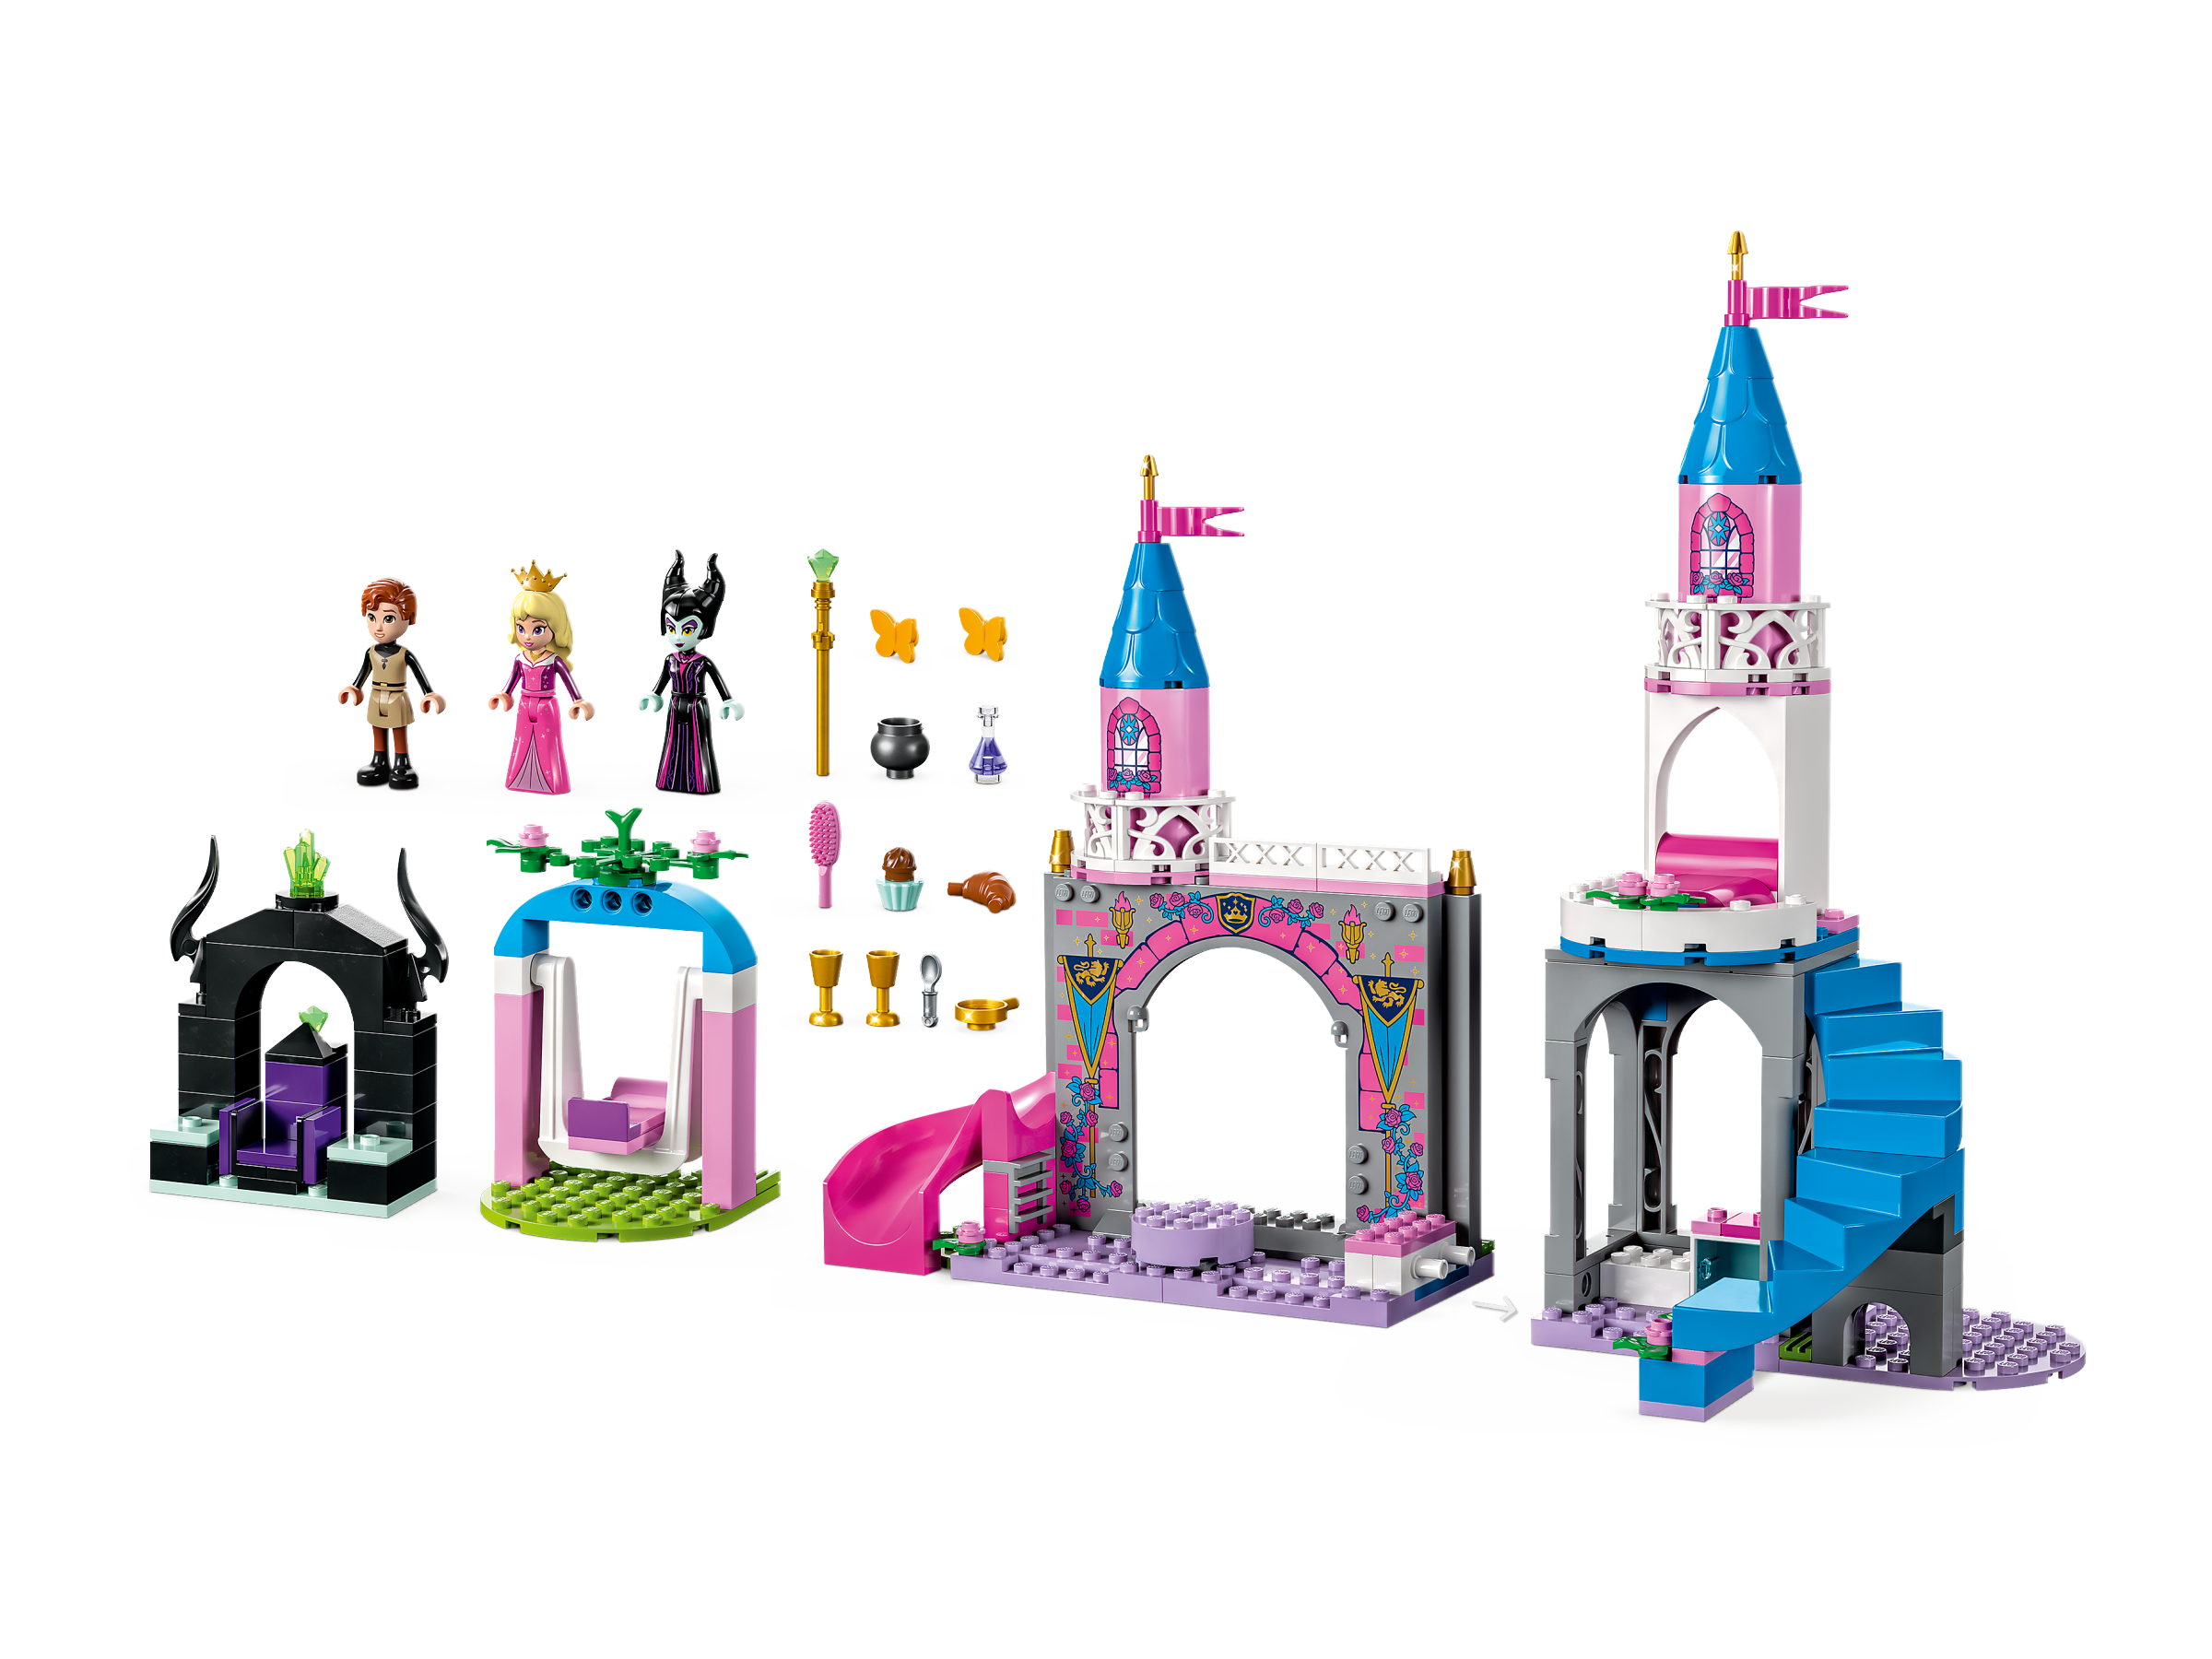 Aurora's Castle 43211 | Disney™ | Buy online at the Official LEGO